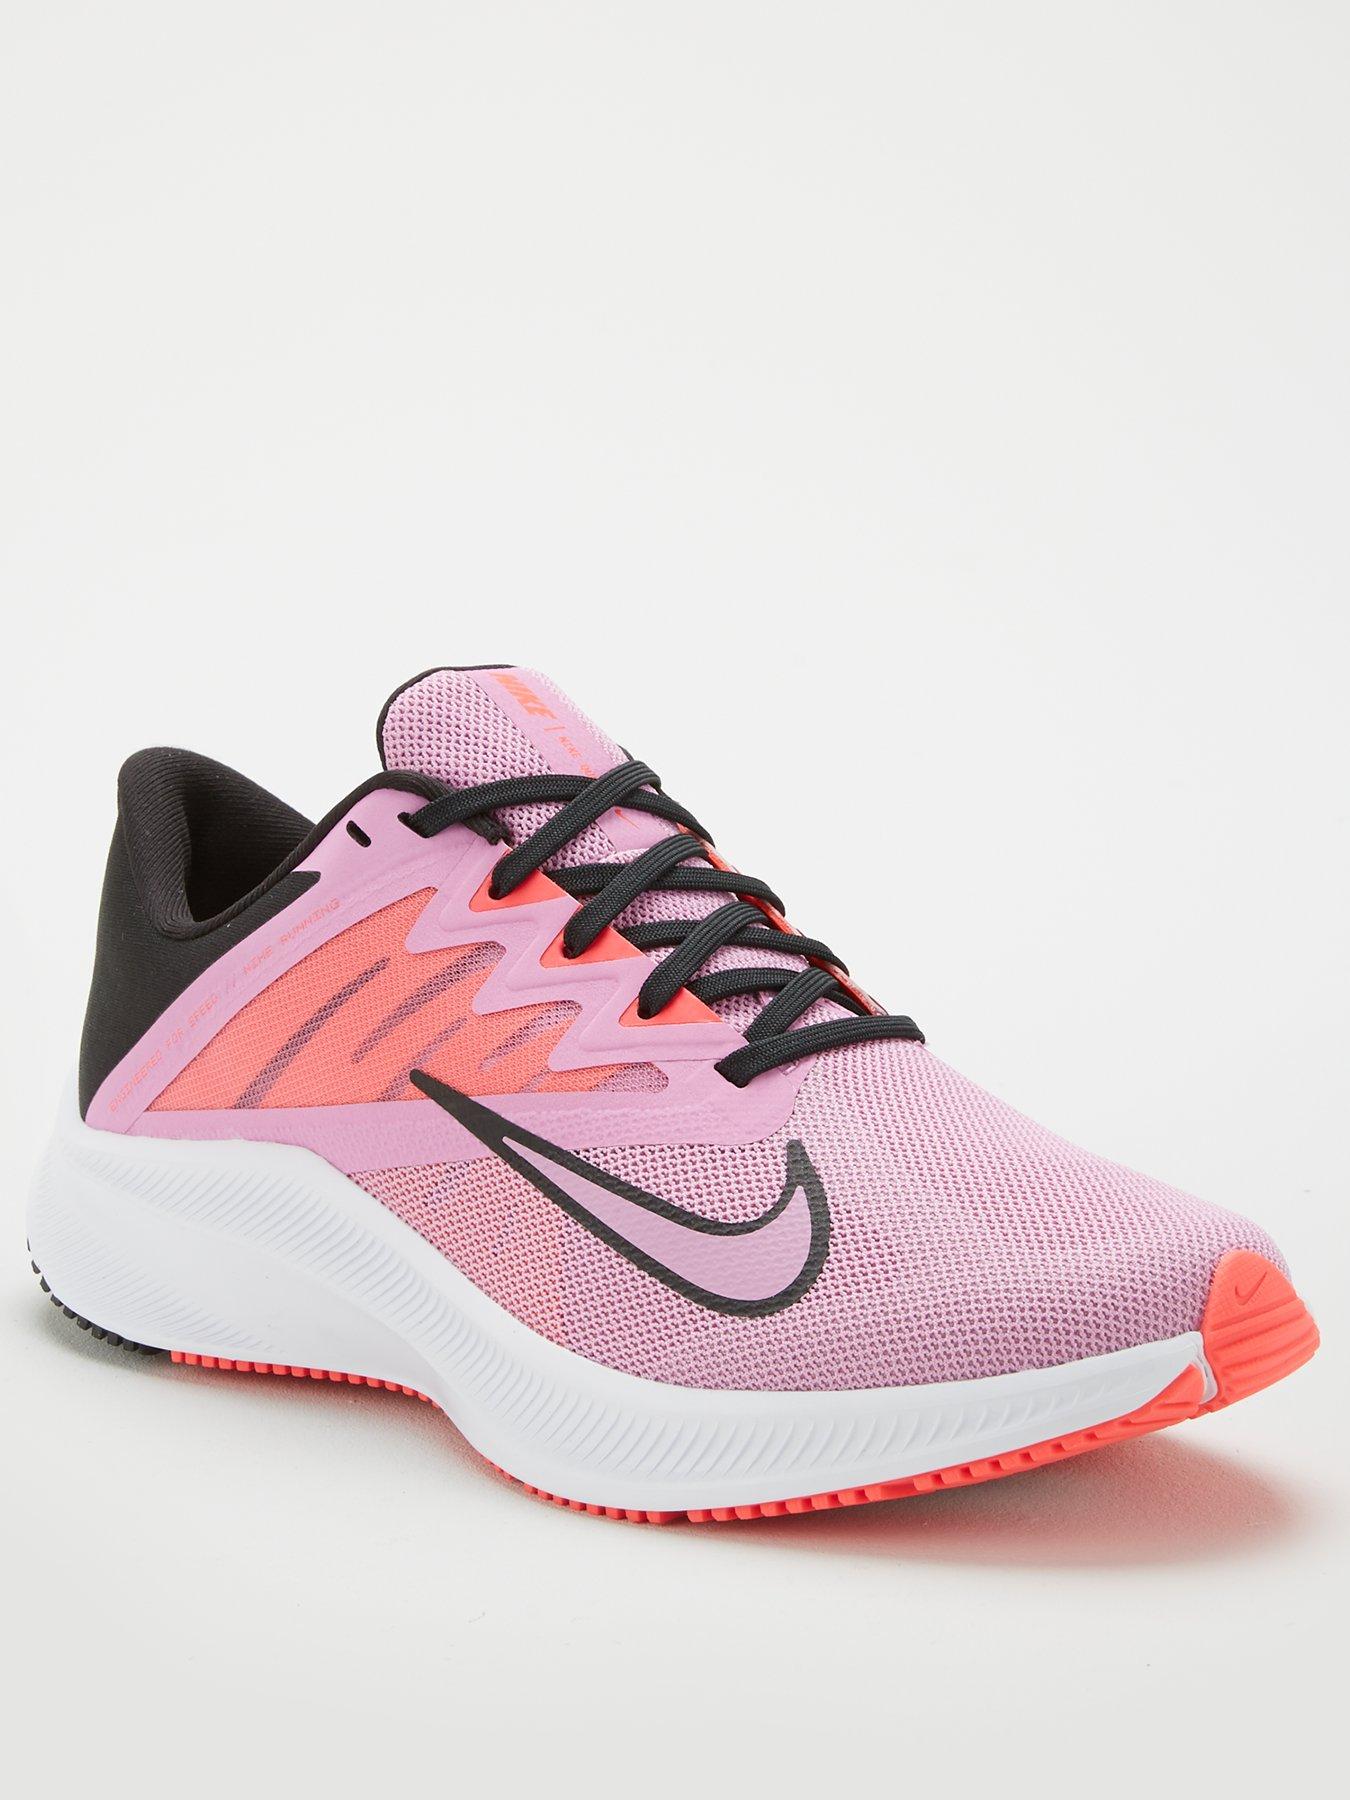 Nike Quest 3 - Pink/White 